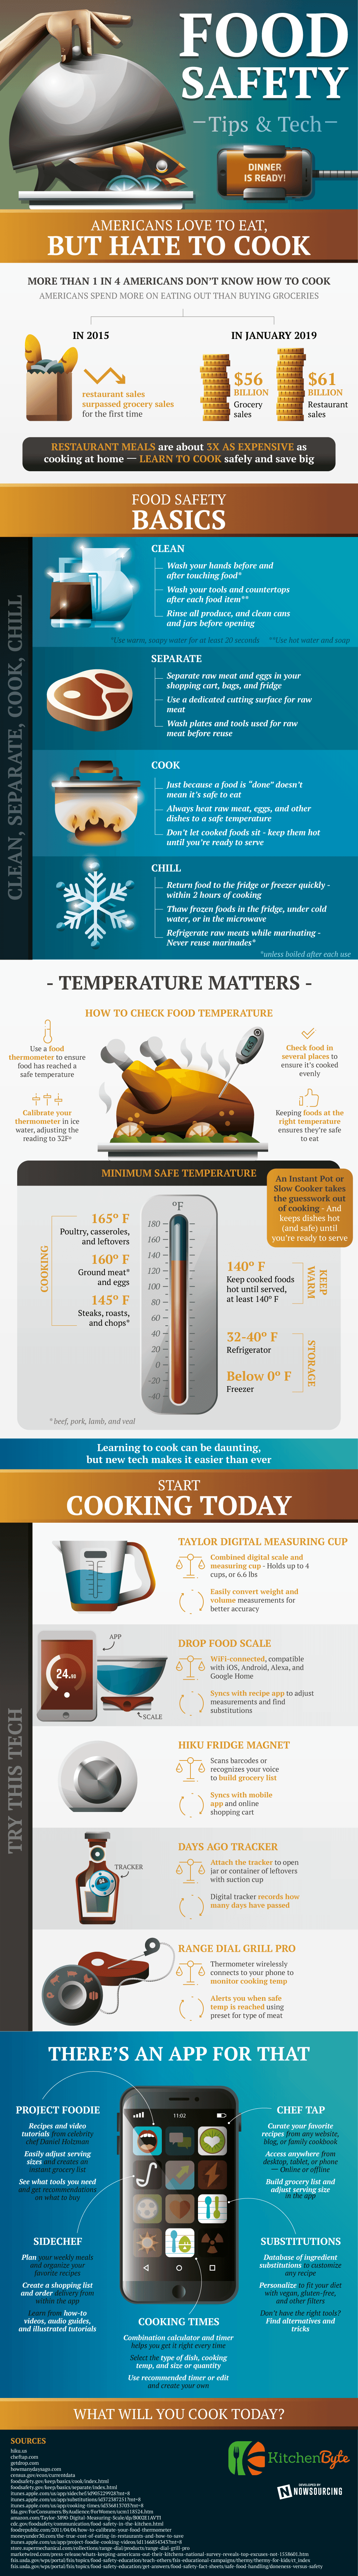 Food Safety Tips for Your Commercial Kitchen Infographic